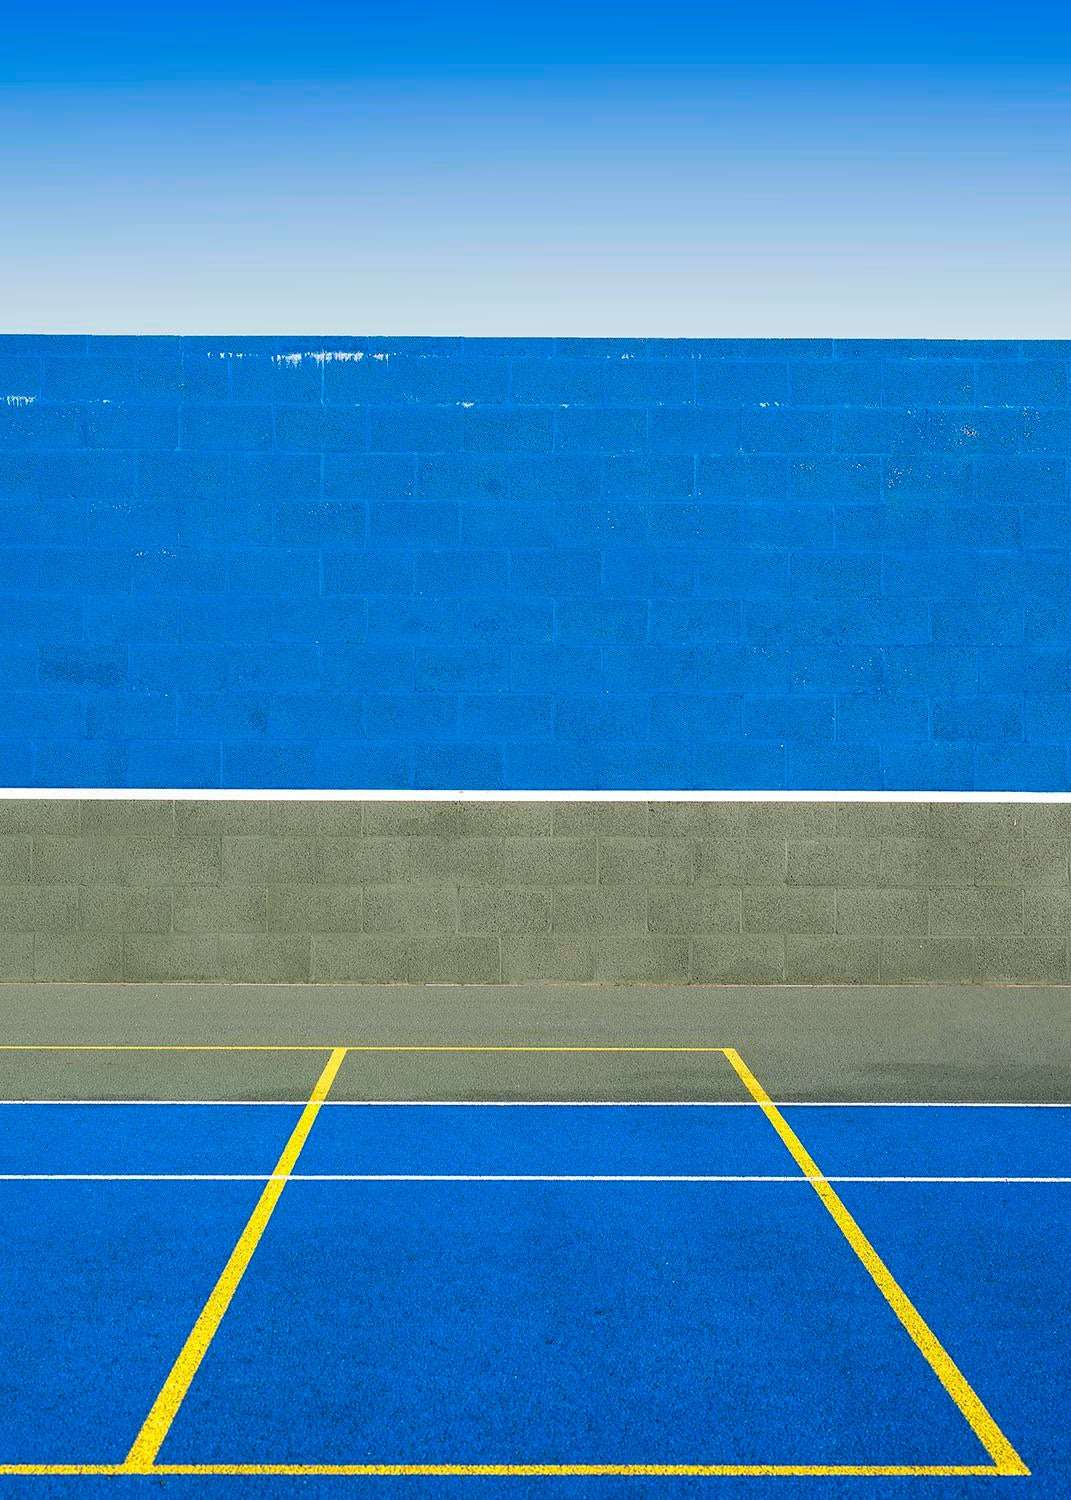 image showing ITAP of a tennis court